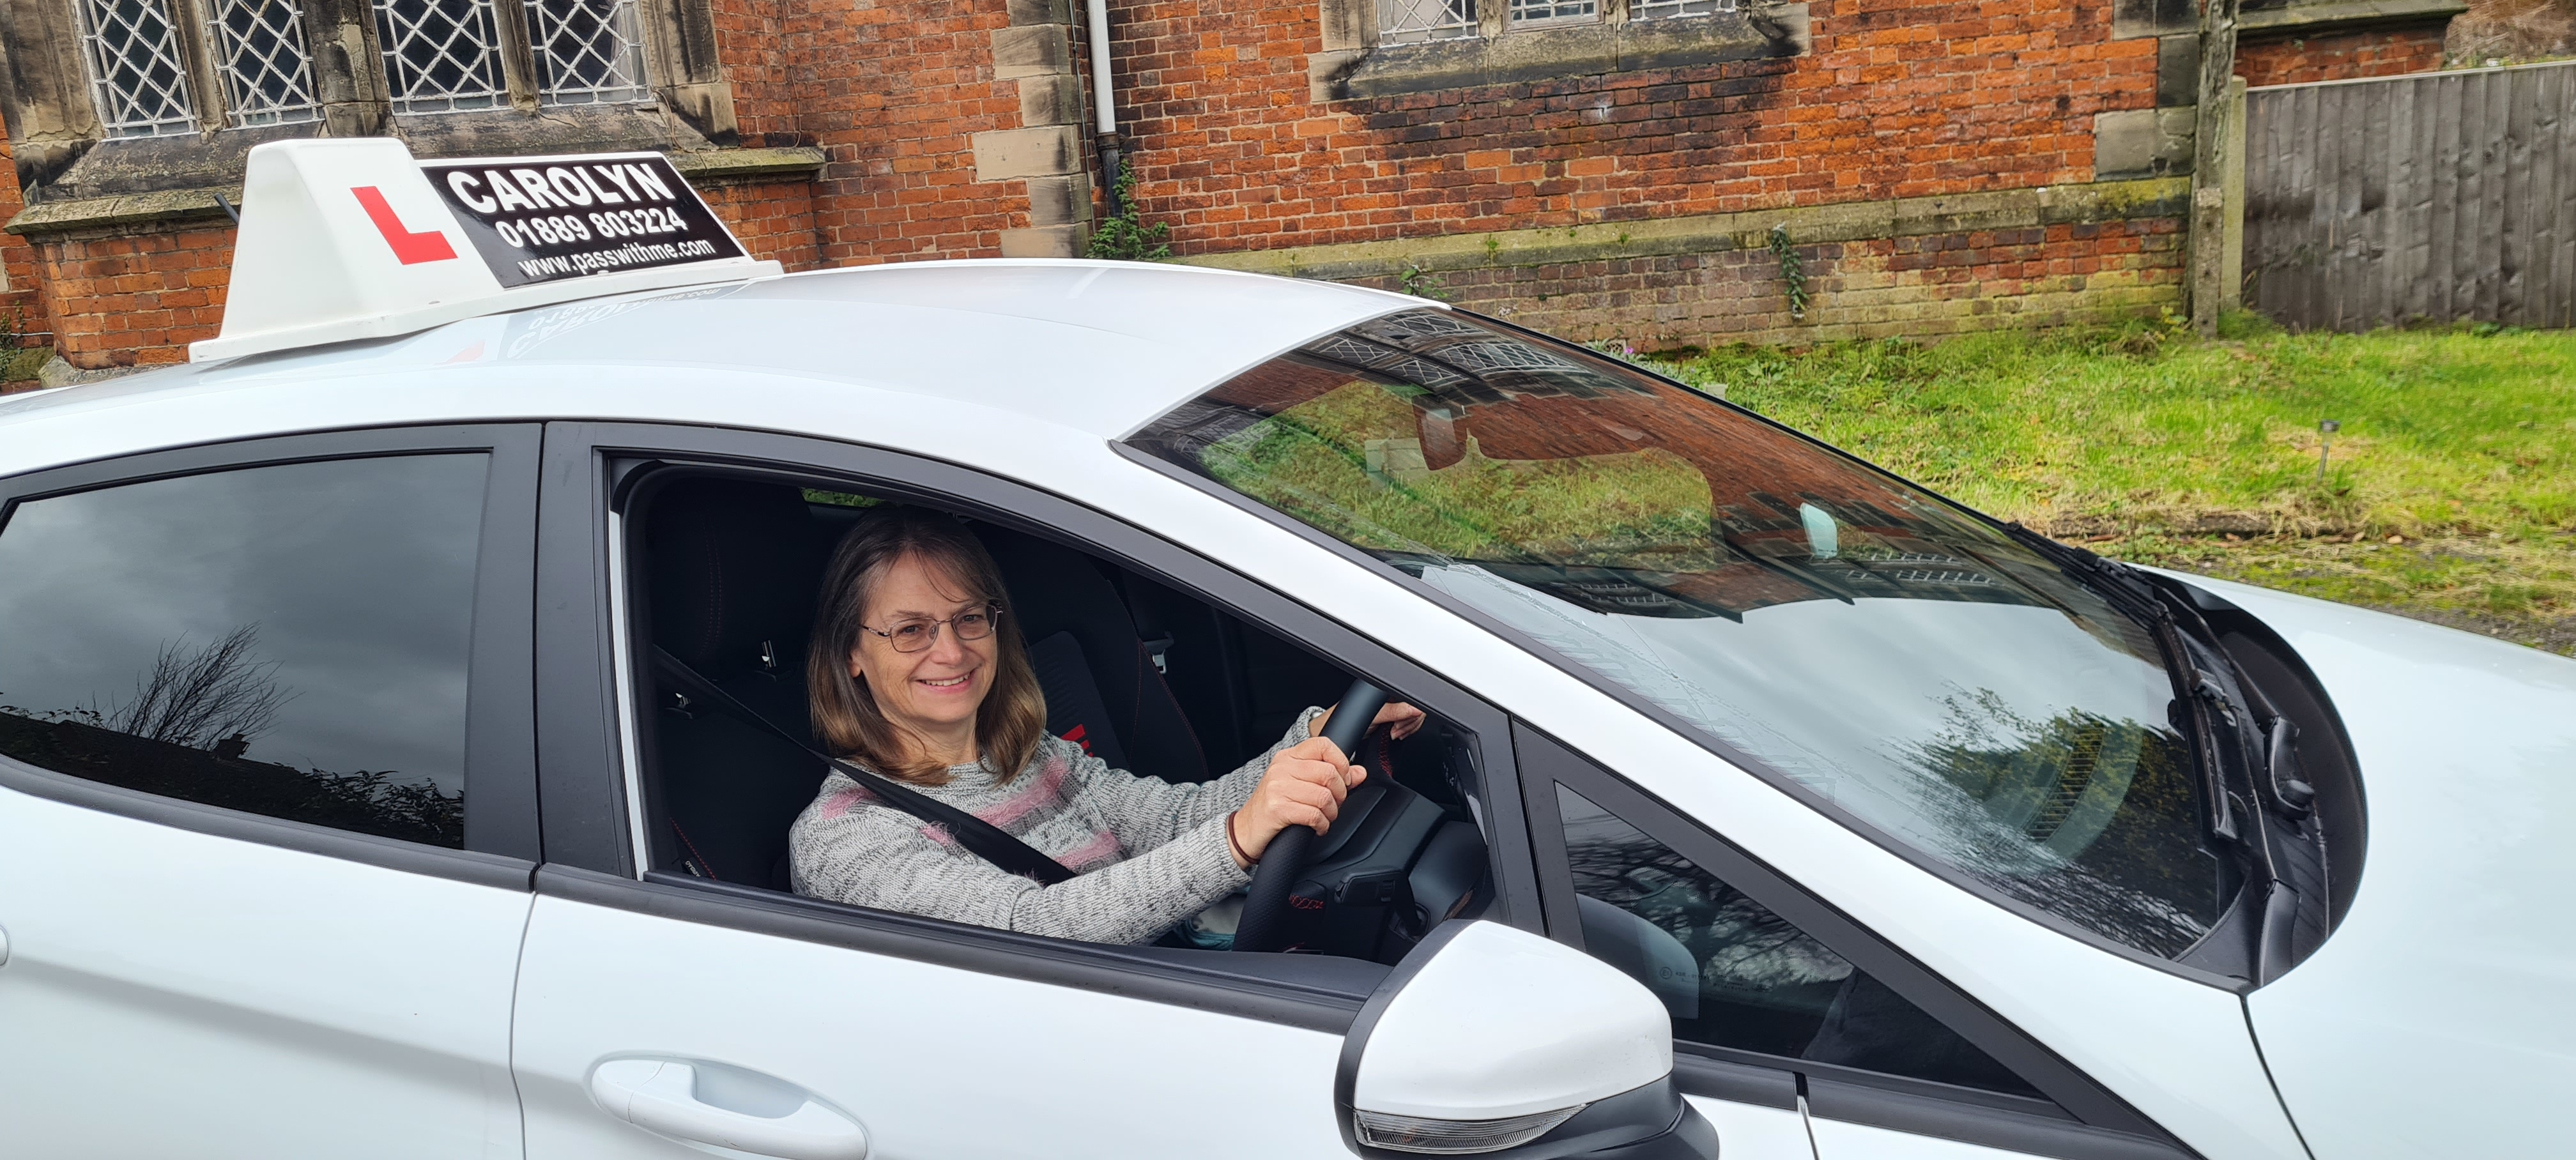 Carolyn Whitehouse, female driving instructor in Cannock and surrounding areas. Please email carolyn.whitehouse@gmail.com or call 01889 803224 for details